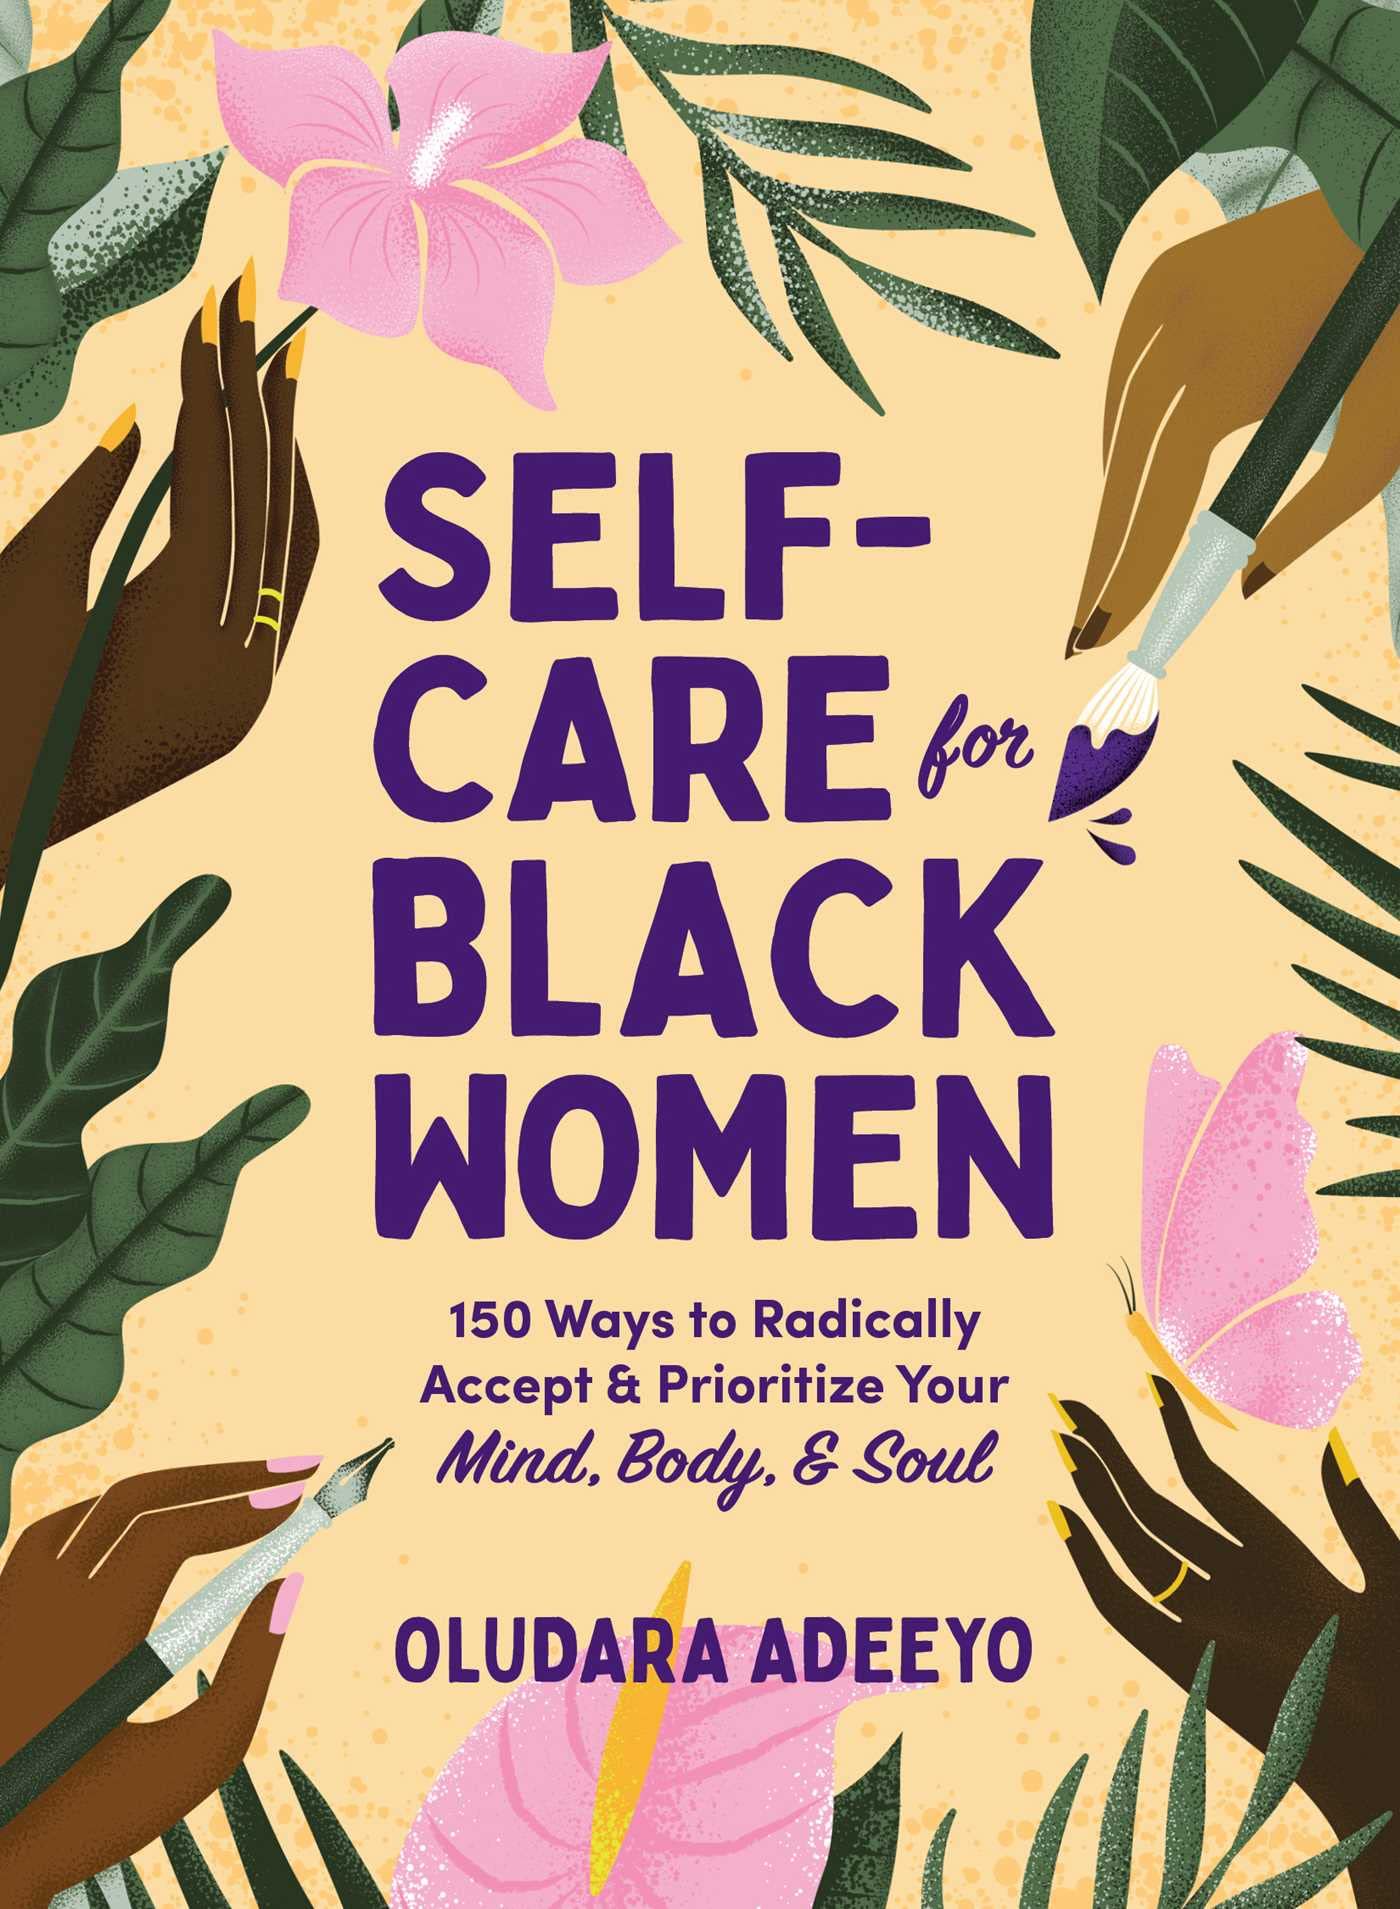 Self-Care for Black Women: 150 Ways to Radically Accept & Prioritize Your Mind, Body & Soul